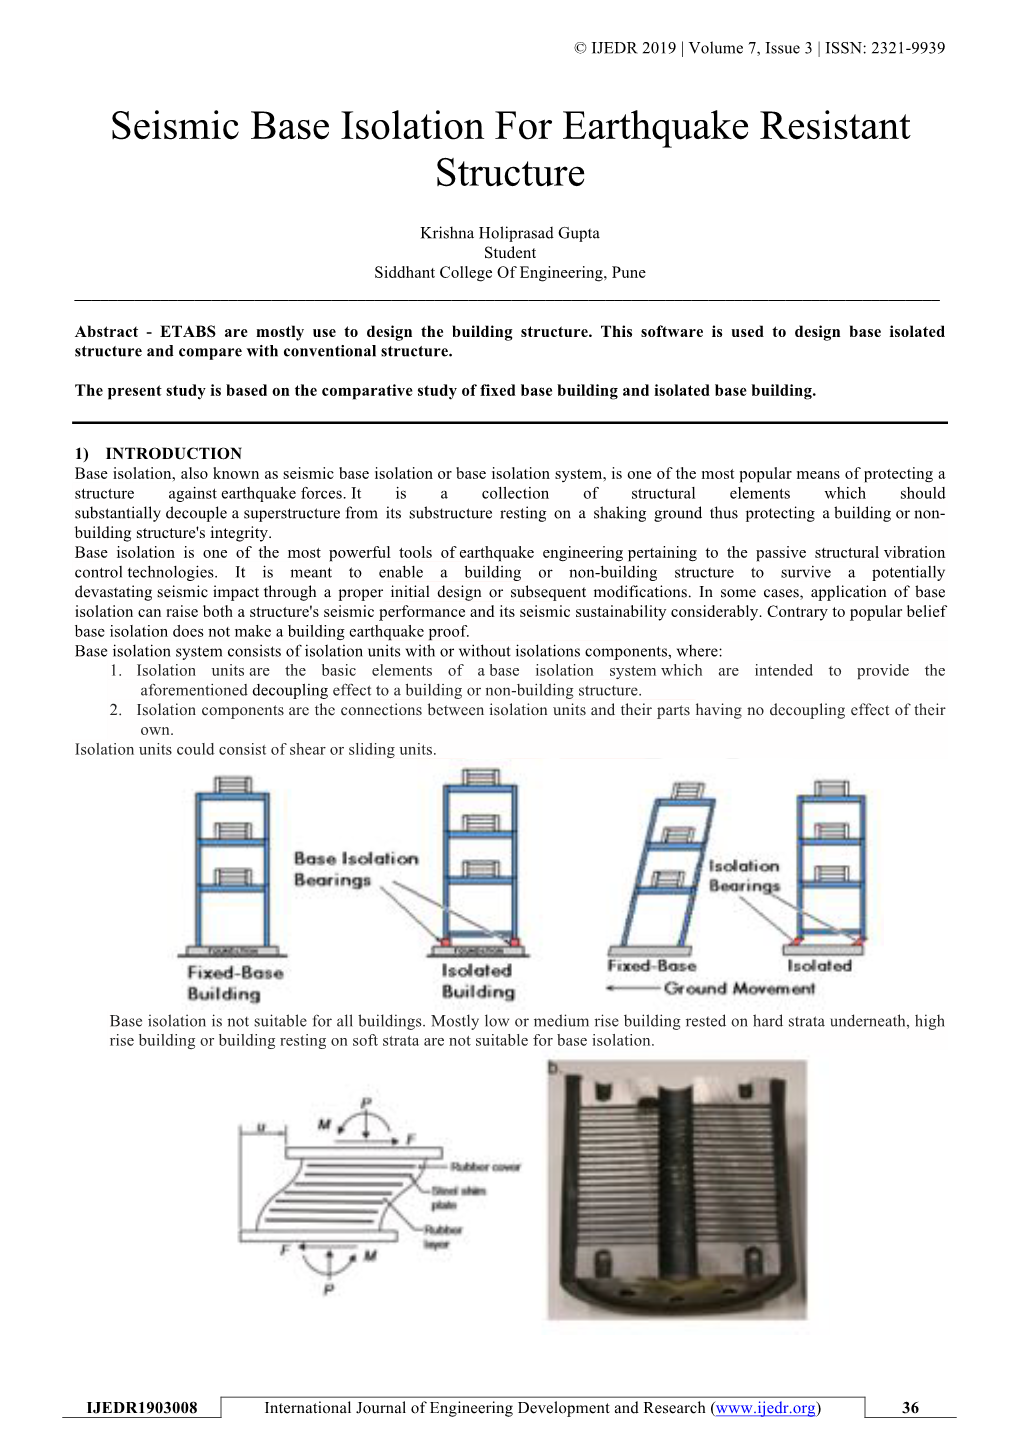 Seismic Base Isolation for Earthquake Resistant Structure